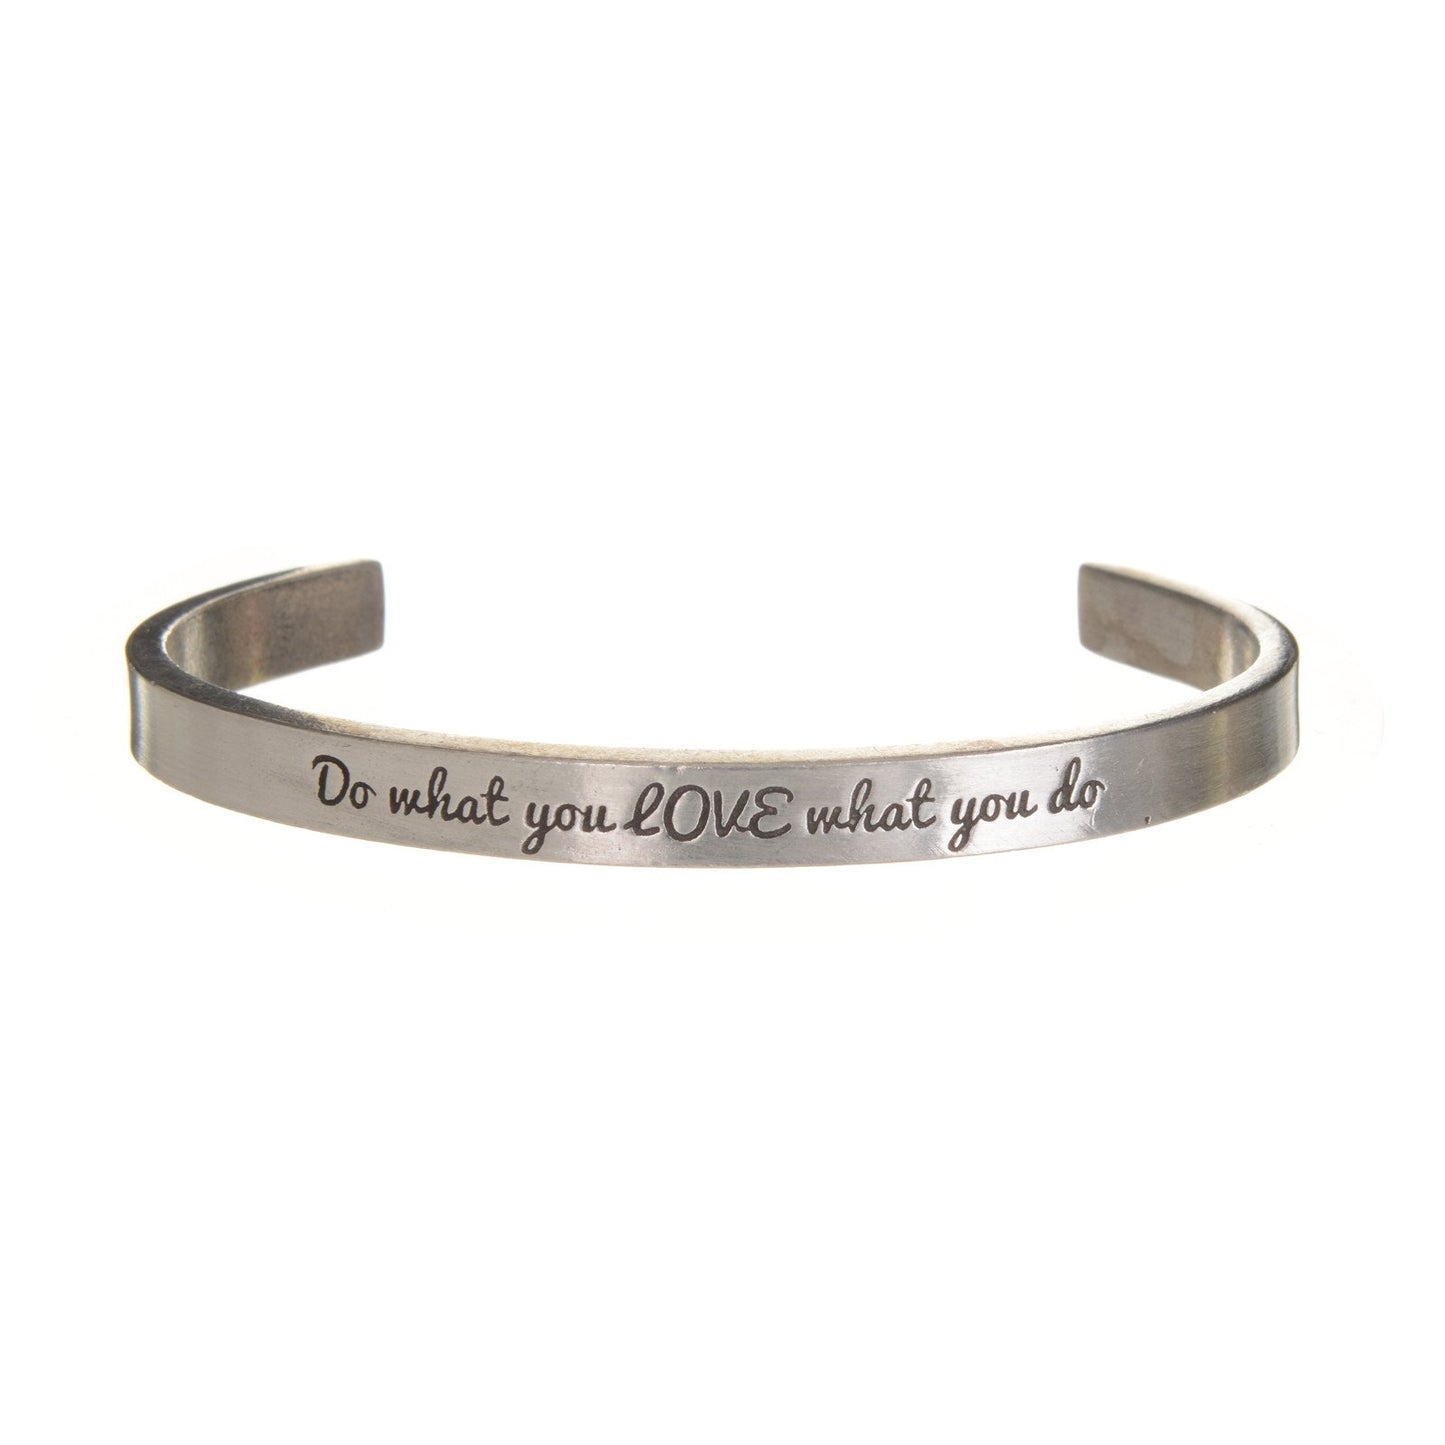 Do what you LOVE what you do Quotable Cuff Bracelet